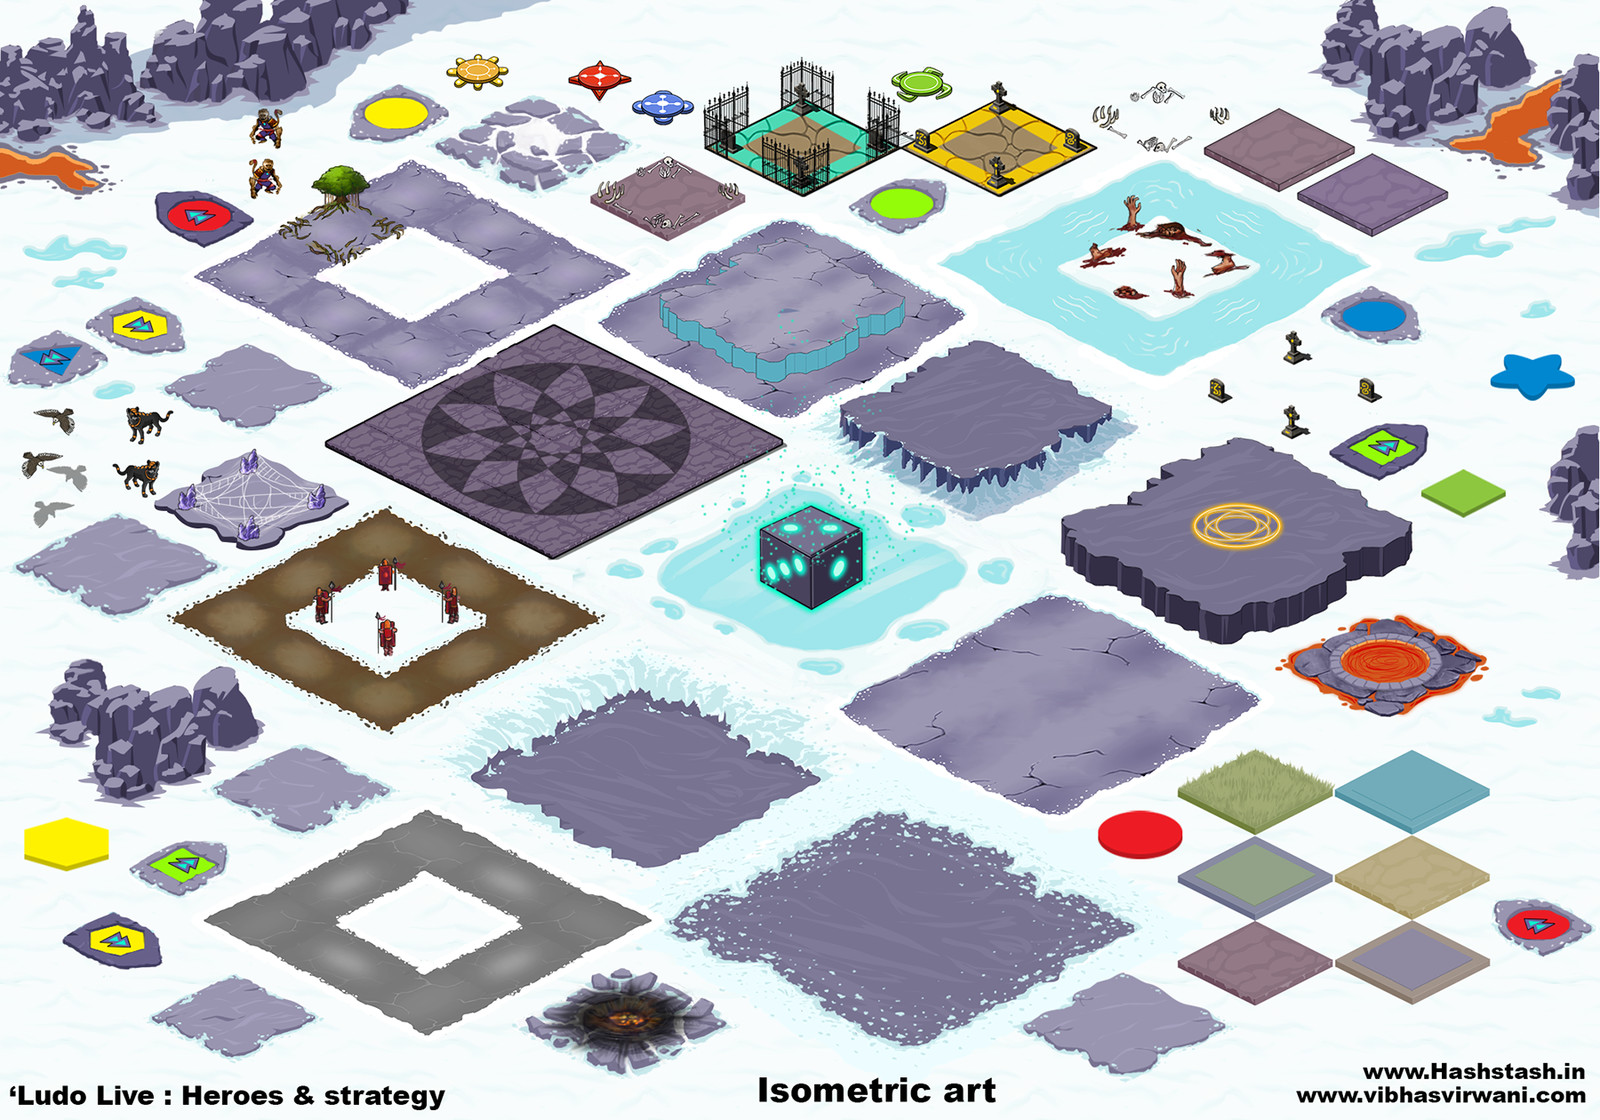 Isometric sprites used for creating the gameplay set